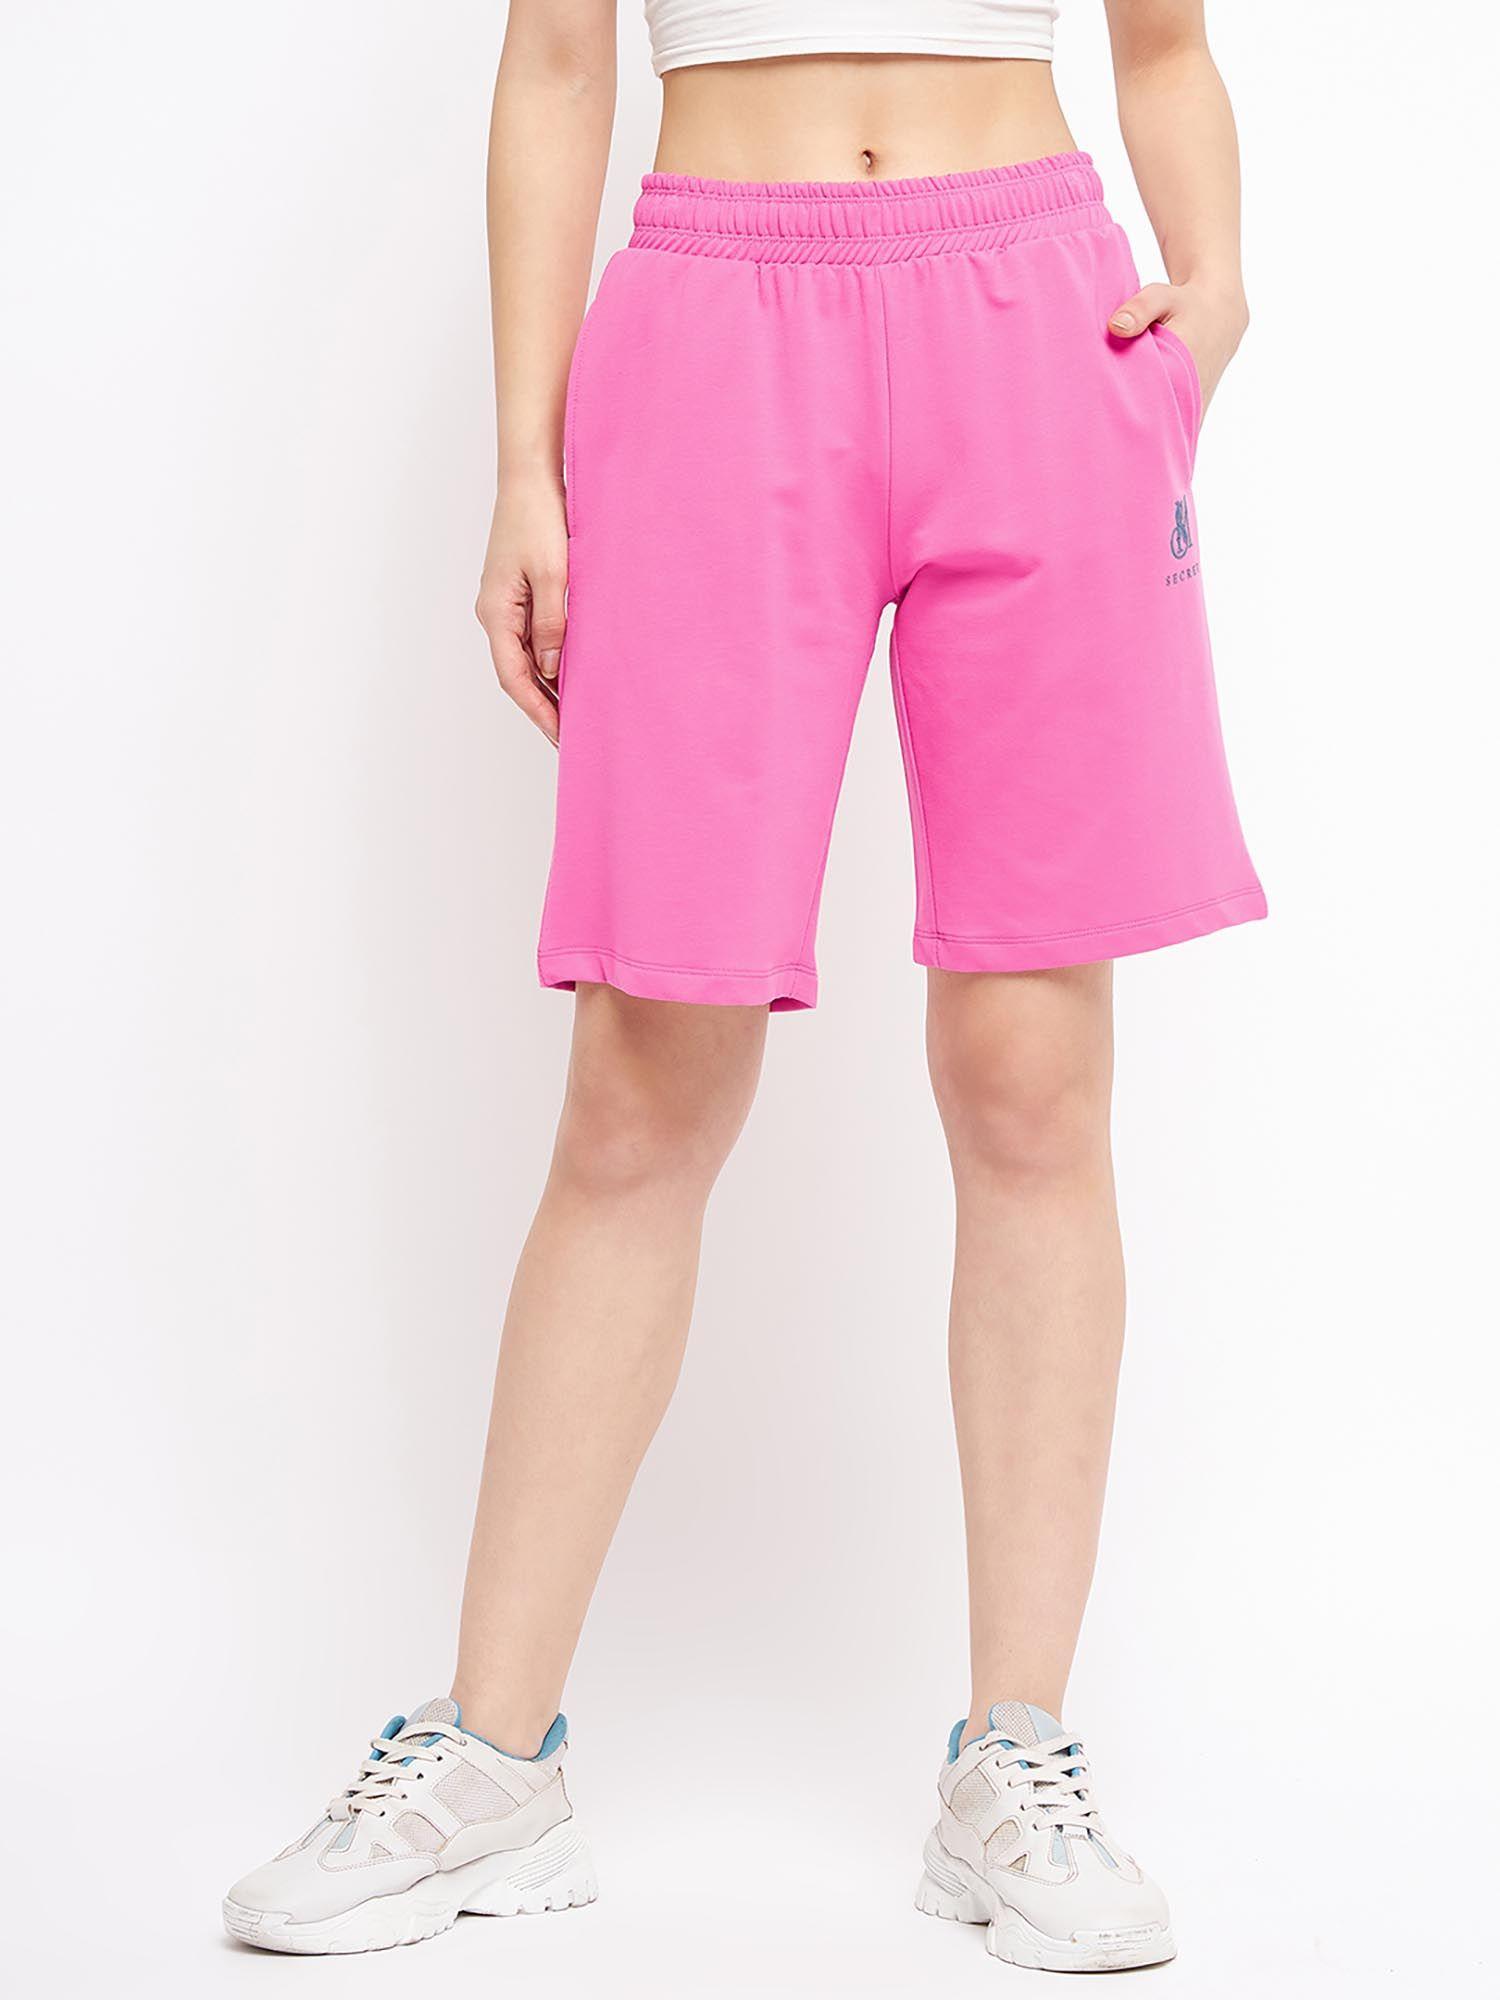 low rise hot pink boxer shorts